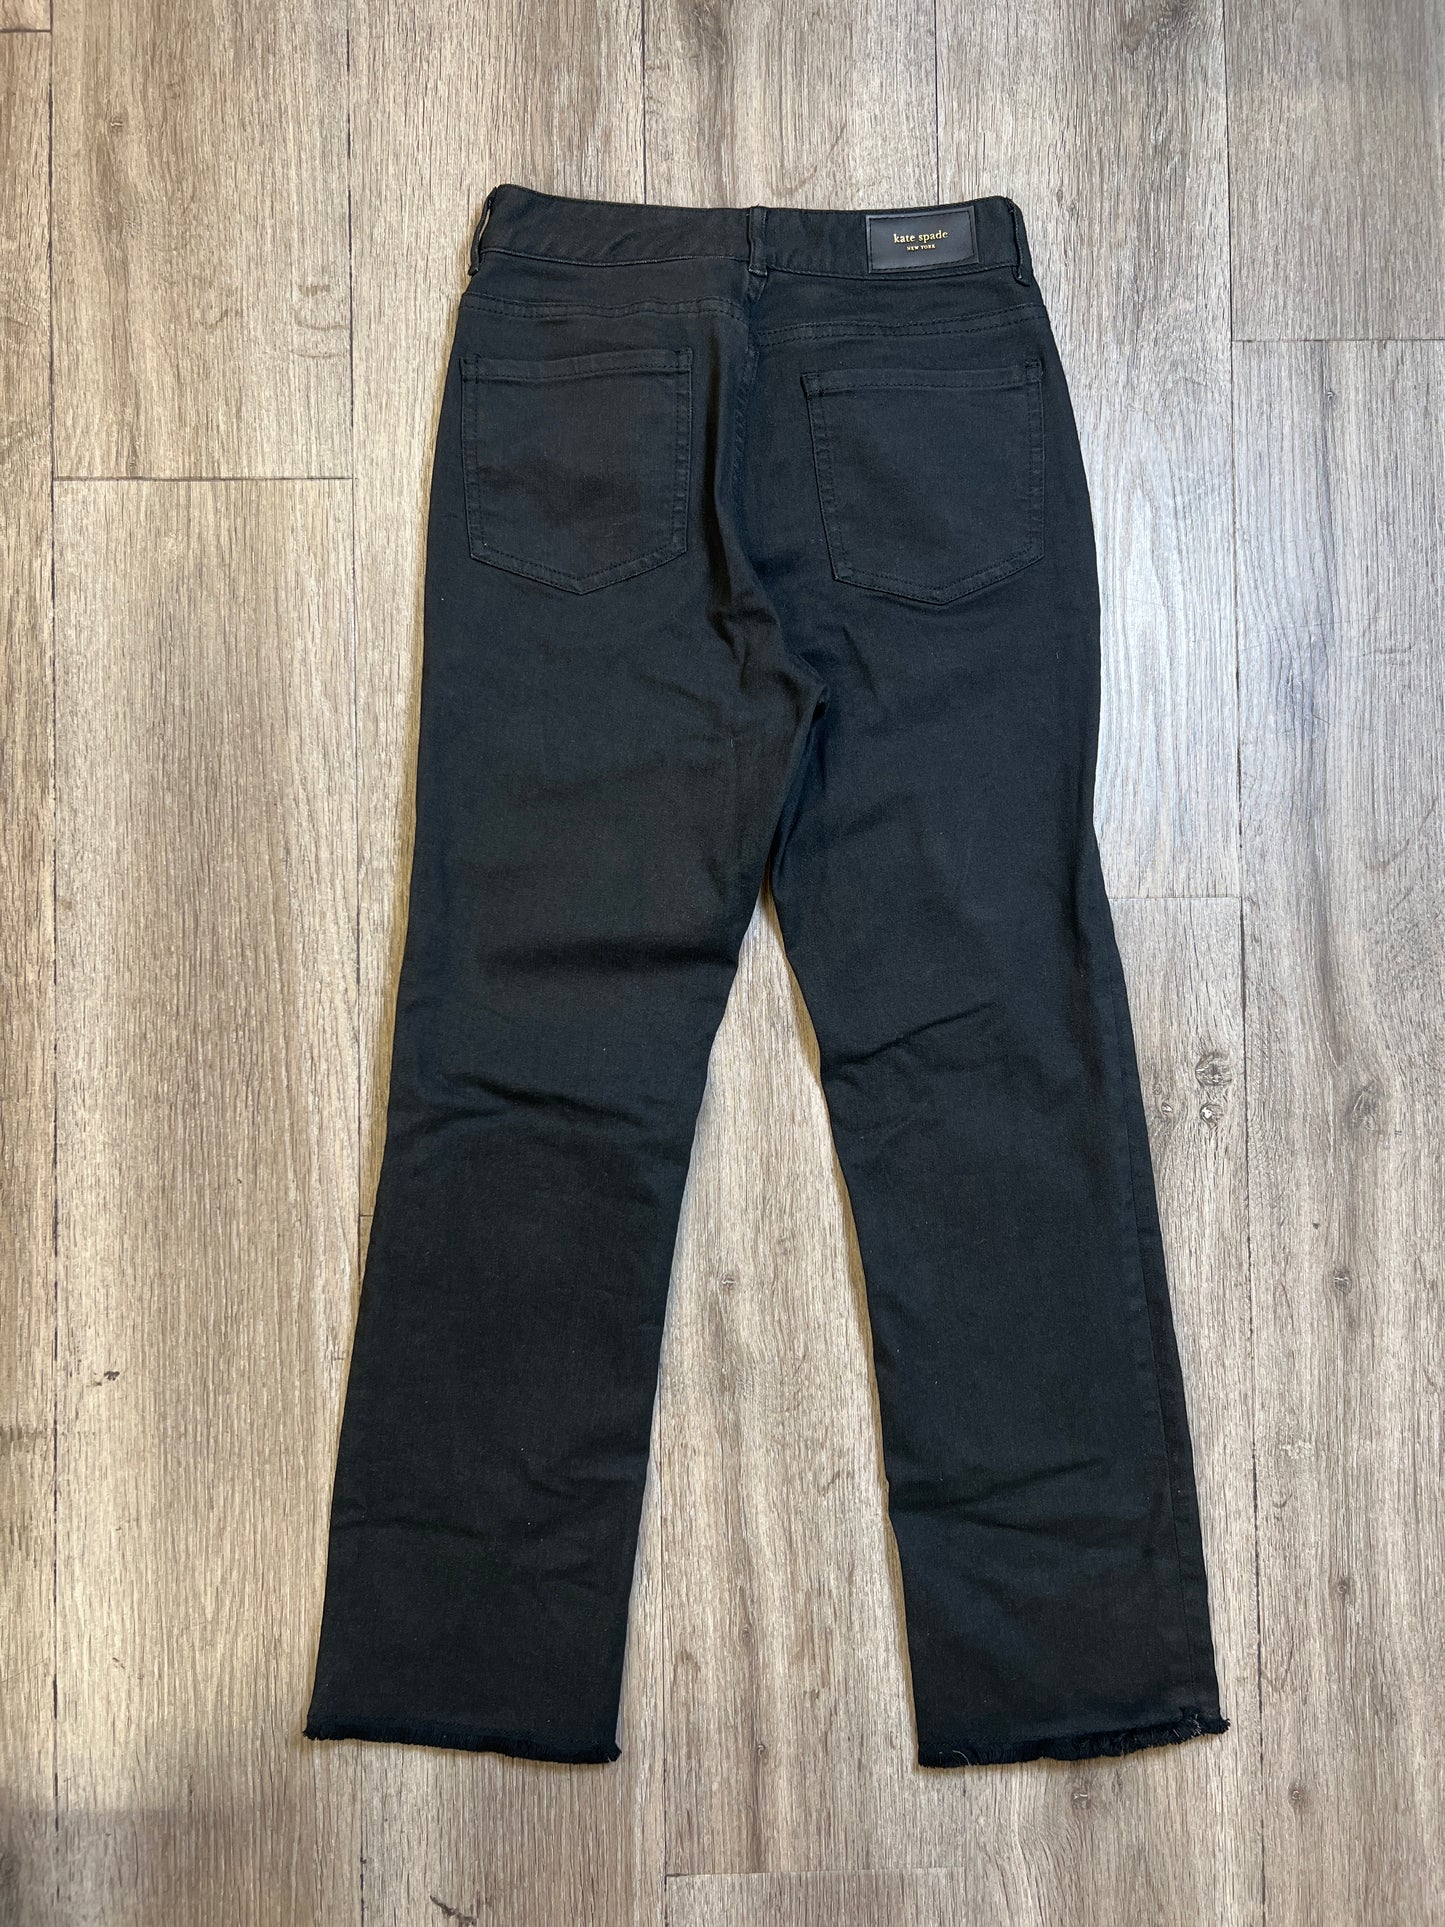 Jeans Straight By Kate Spade  Size: 2